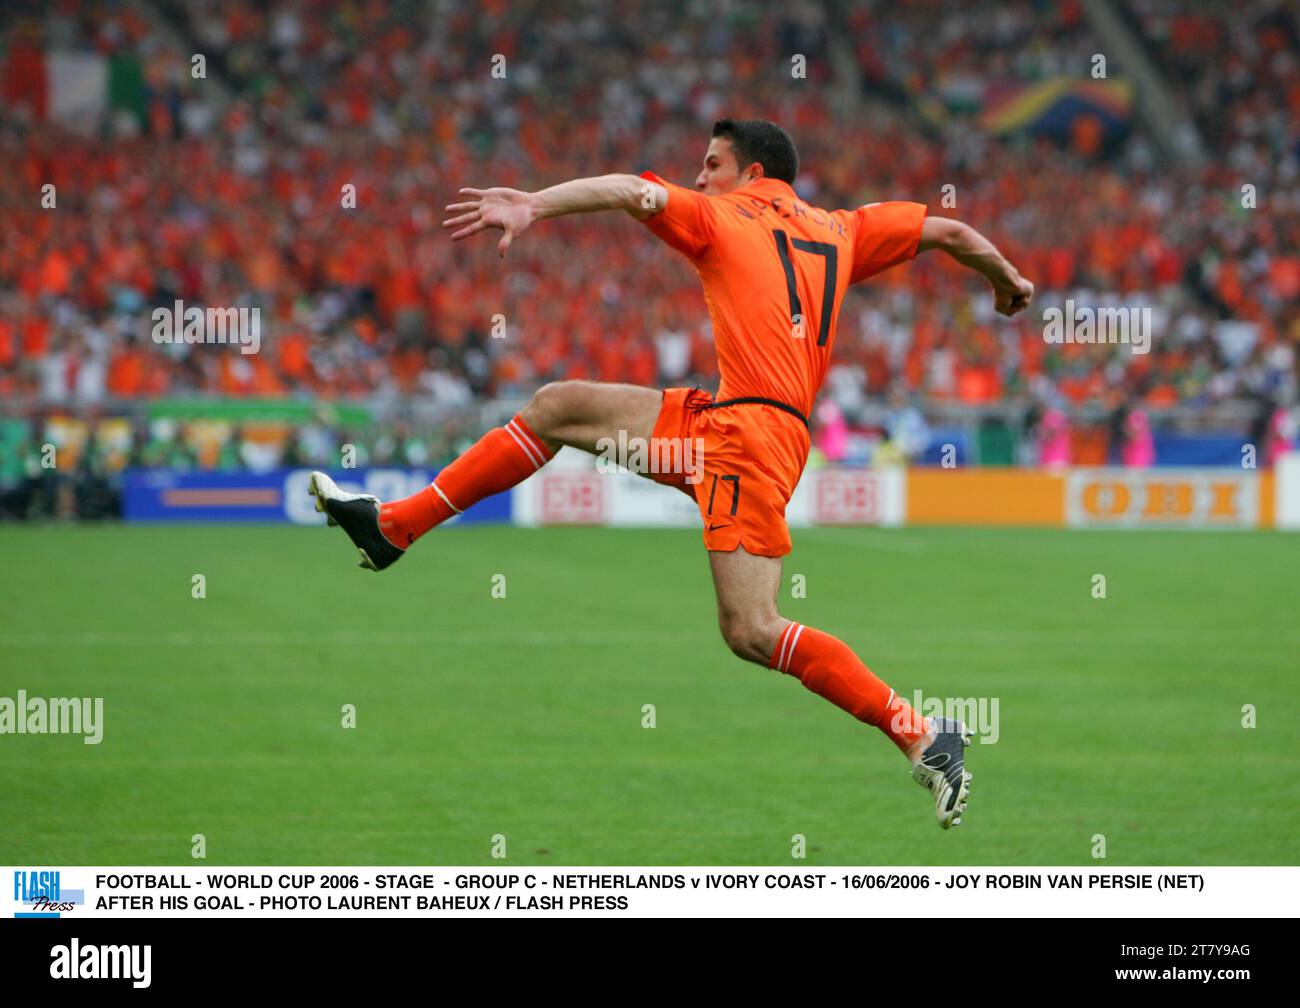 FOOTBALL - WORLD CUP 2006 - STAGE - GROUP C - NETHERLANDS v IVORY COAST - 16/06/2006 - JOY ROBIN VAN PERSIE (NET) AFTER HIS GOAL - PHOTO LAURENT BAHEUX / FLASH PRESS Stock Photo